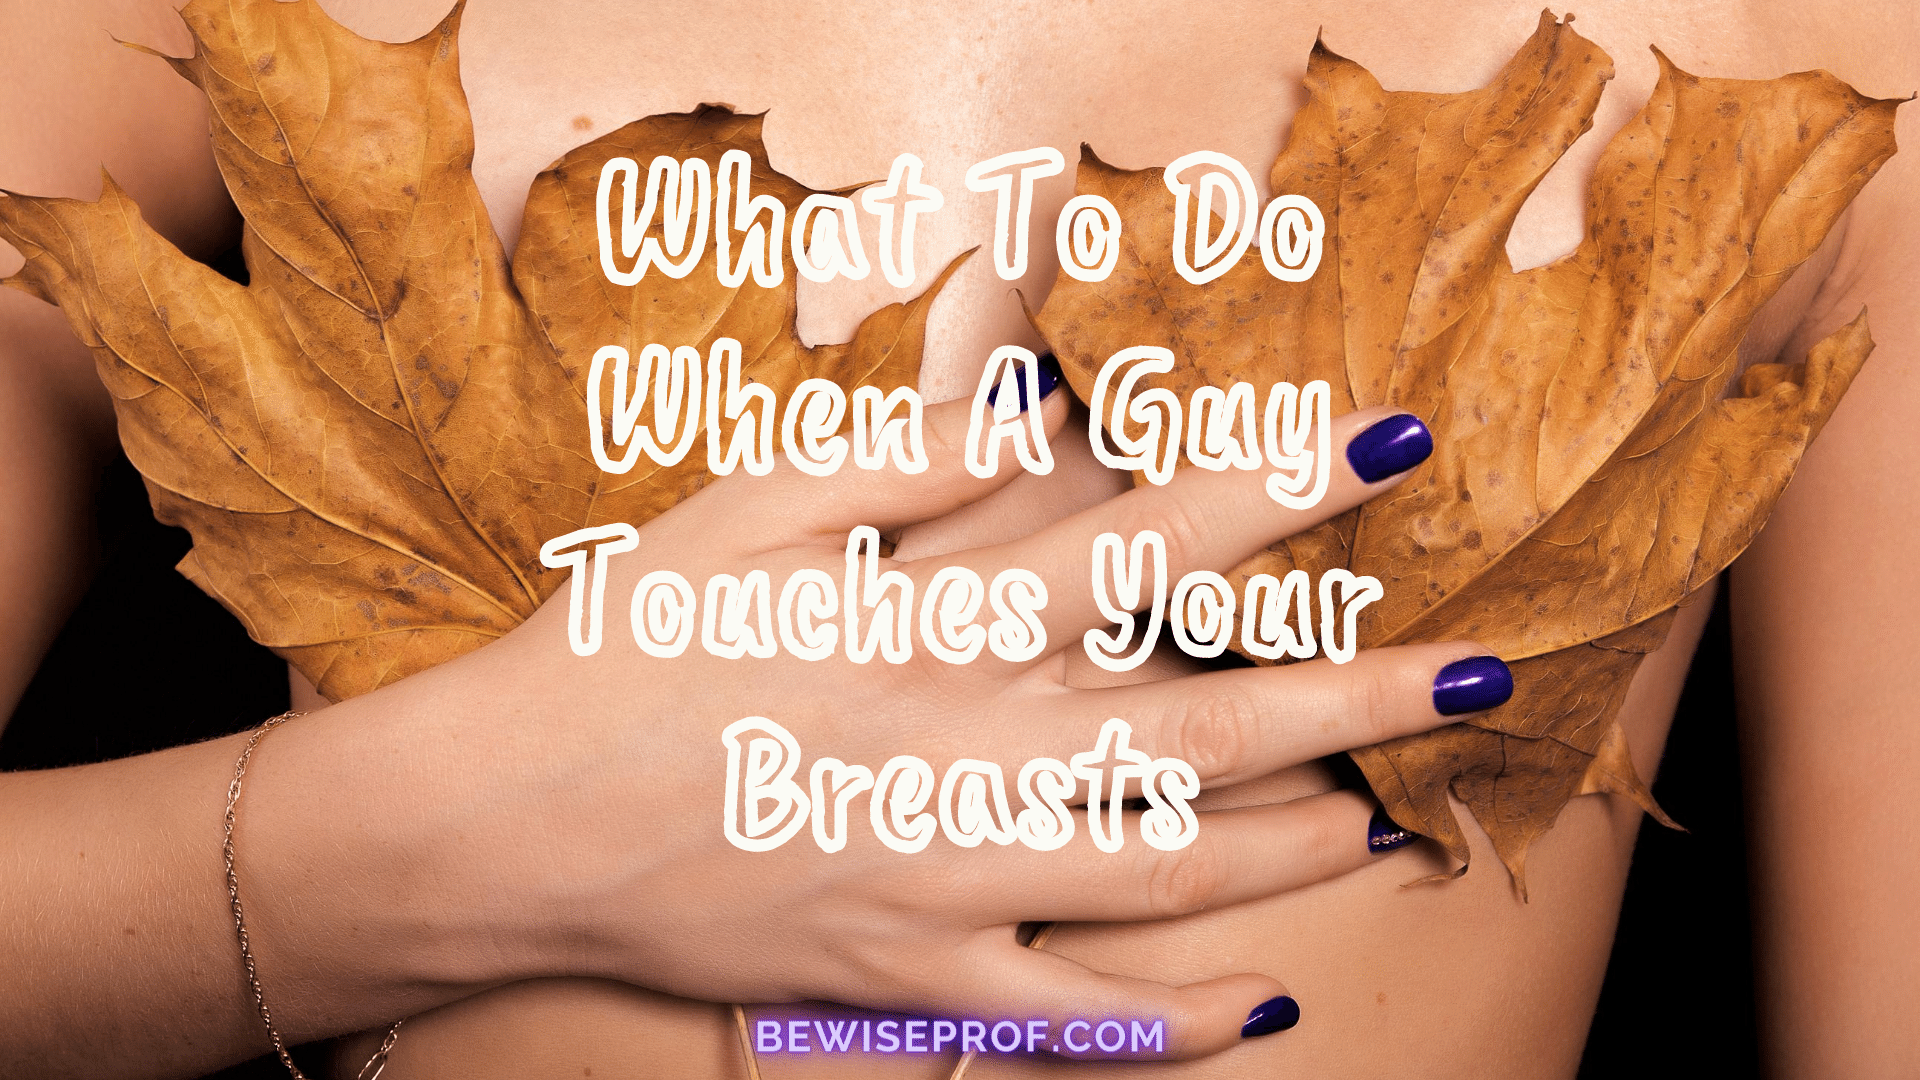 What To Do When A Guy Touches Your Breasts